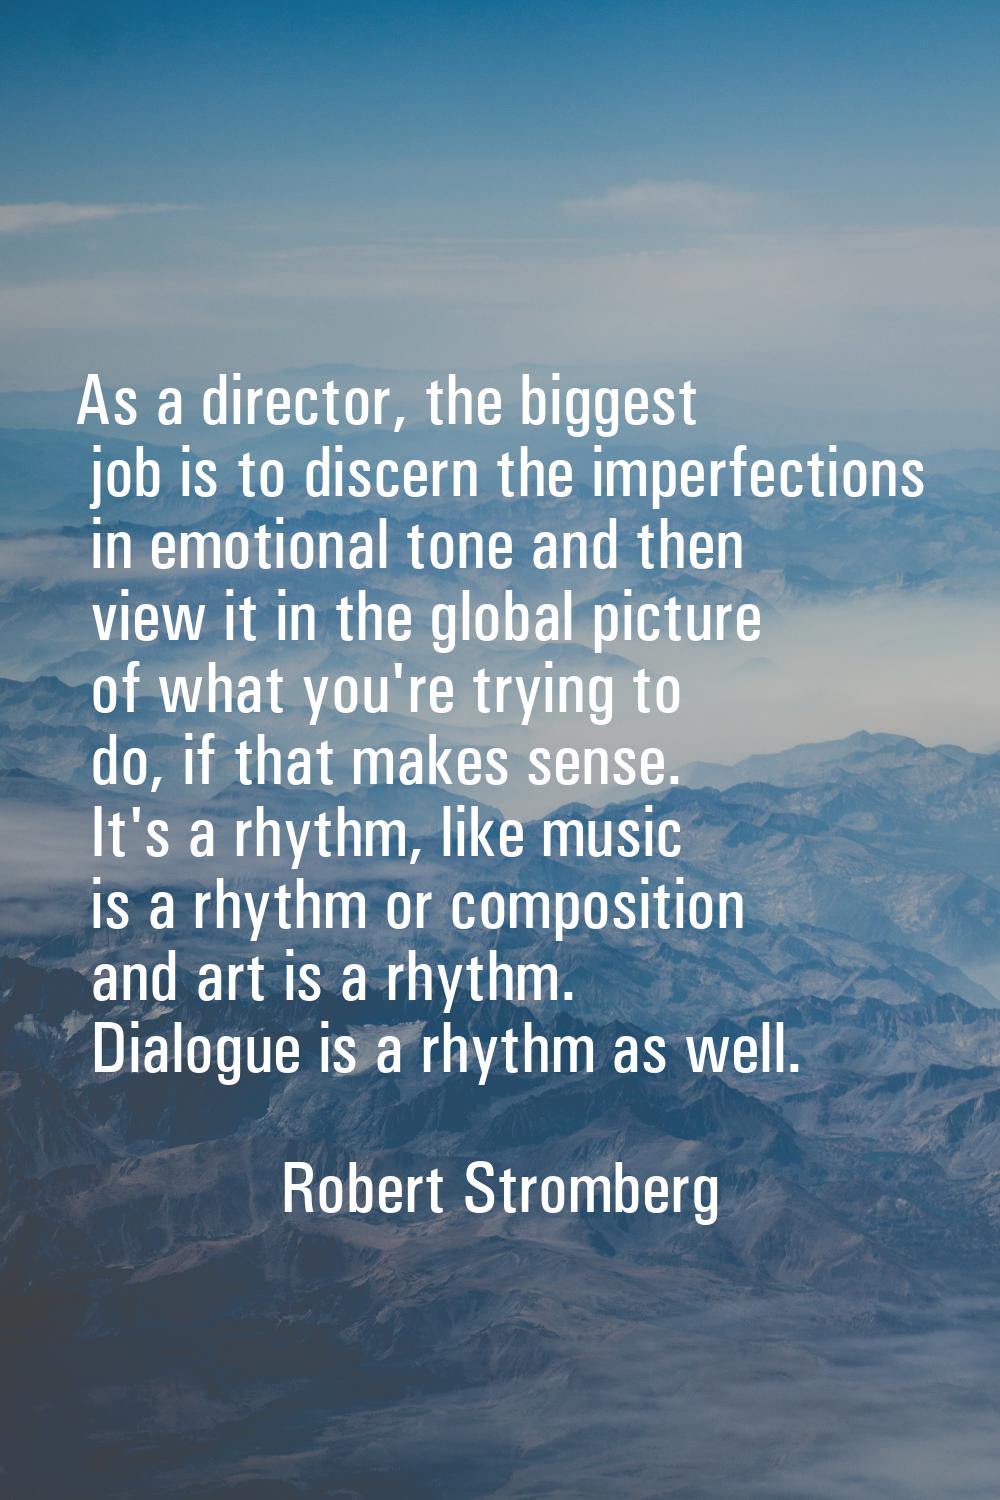 As a director, the biggest job is to discern the imperfections in emotional tone and then view it i